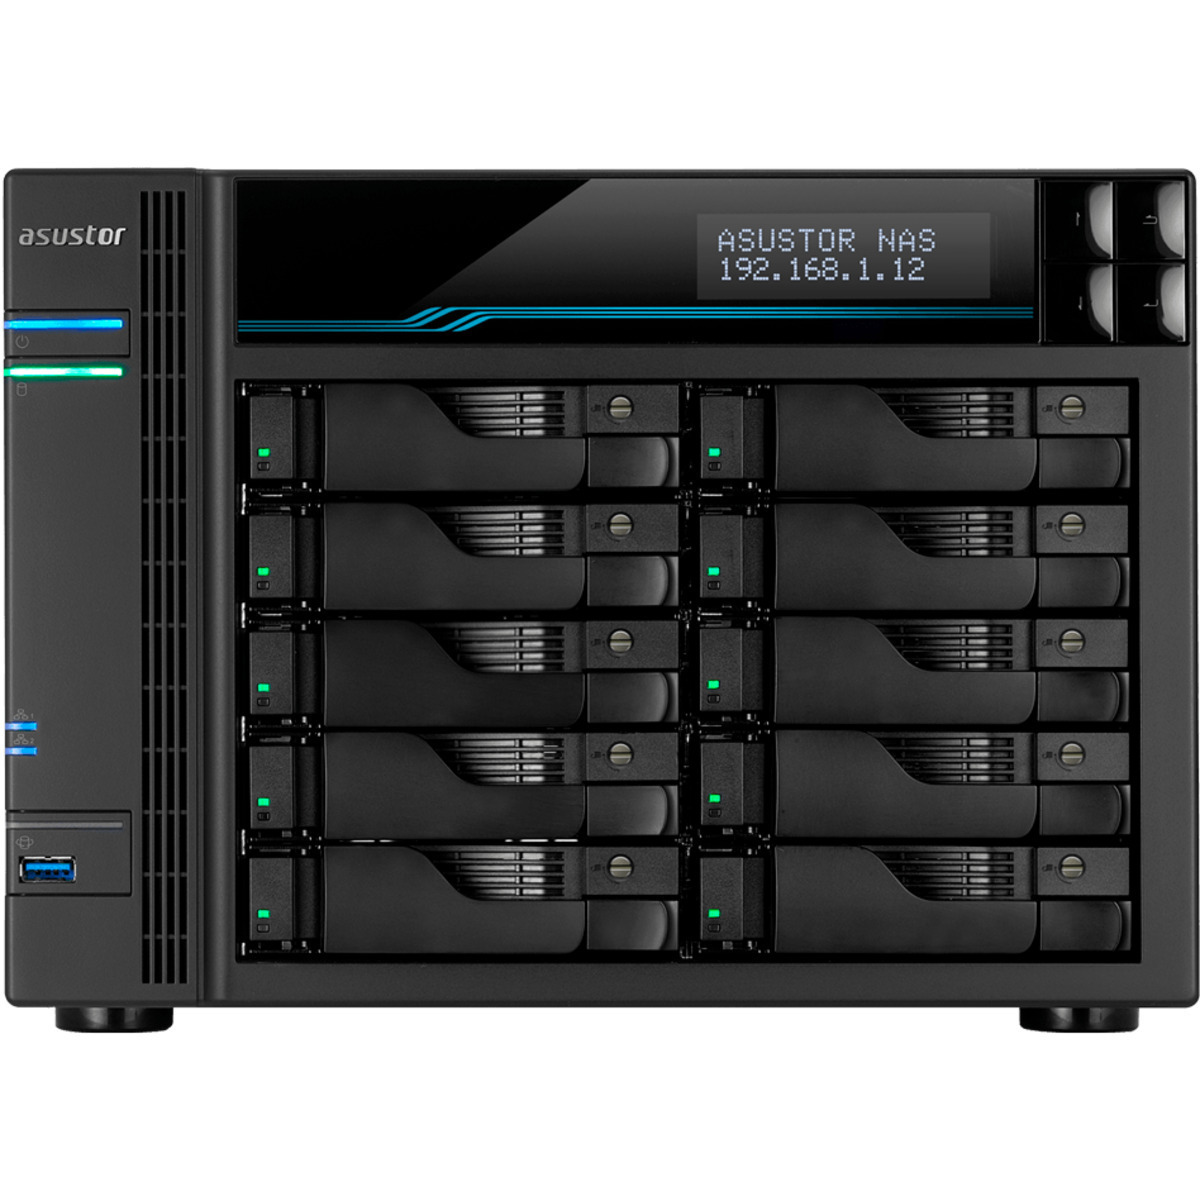 buy $6190 ASUSTOR AS7110T Lockerstor 10 Pro 160tb Desktop NAS - Network Attached Storage Device 10x16000gb Toshiba Enterprise Capacity MG08ACA16TE 3.5 7200rpm SATA 6Gb/s HDD ENTERPRISE Class Drives Installed - Burn-In Tested - nas headquarters buy network attached storage server device das new raid-5 free shipping usa AS7110T Lockerstor 10 Pro